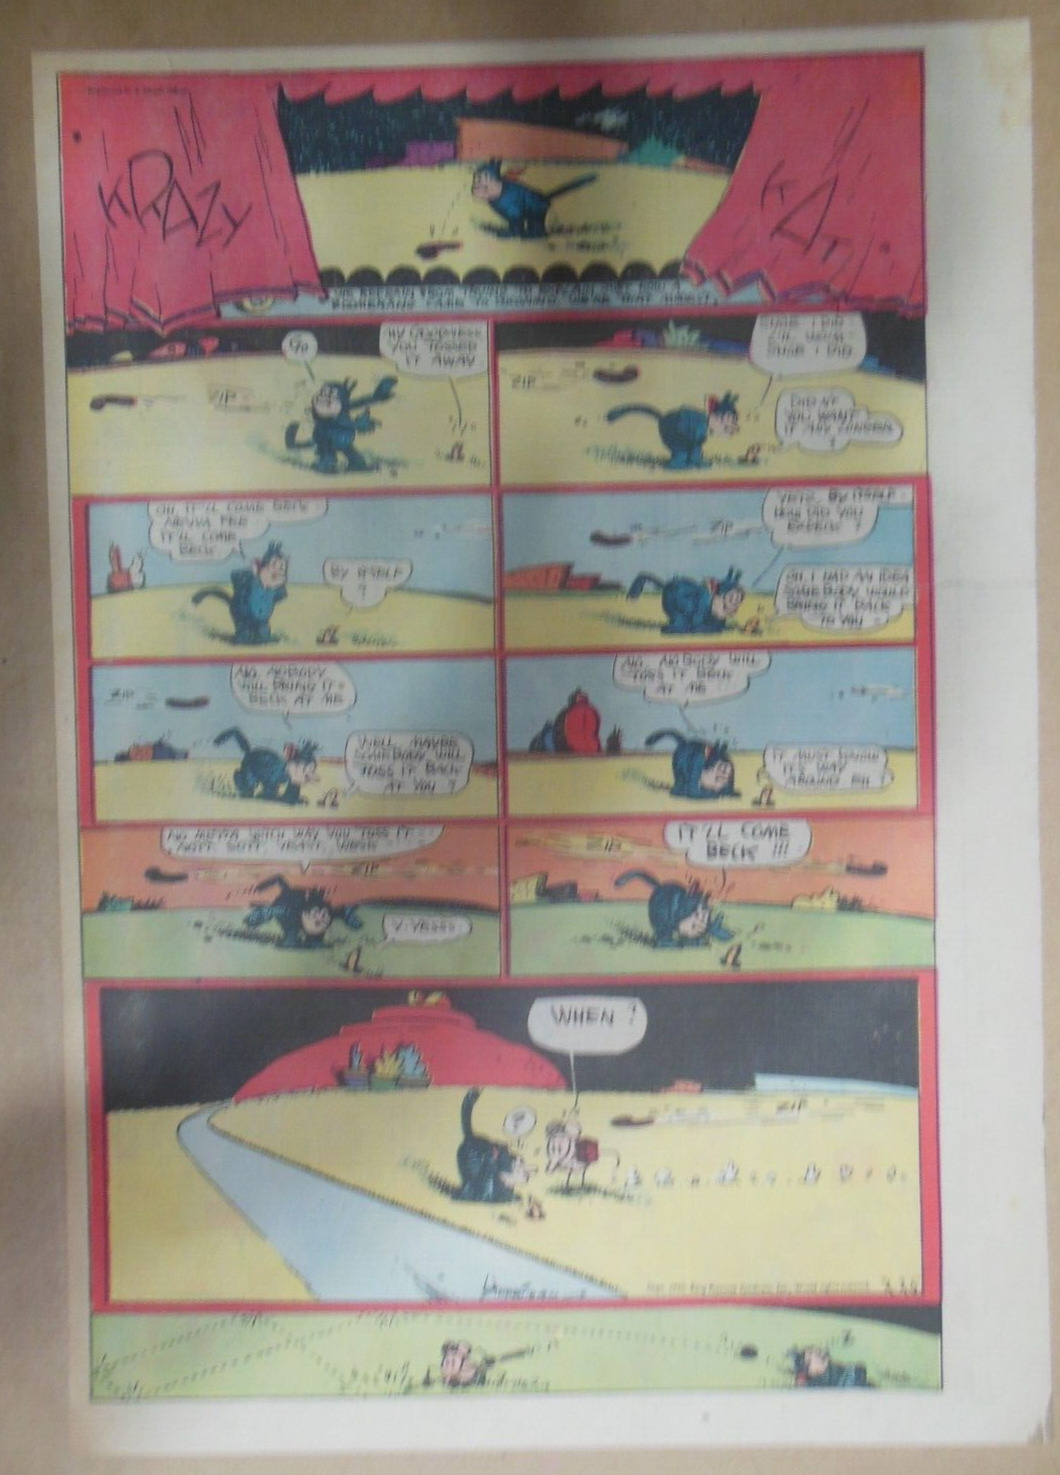 Krazy Kat Sunday Page by George Herriman from 2/25/1940 Size: 11 x 15 inch Rare